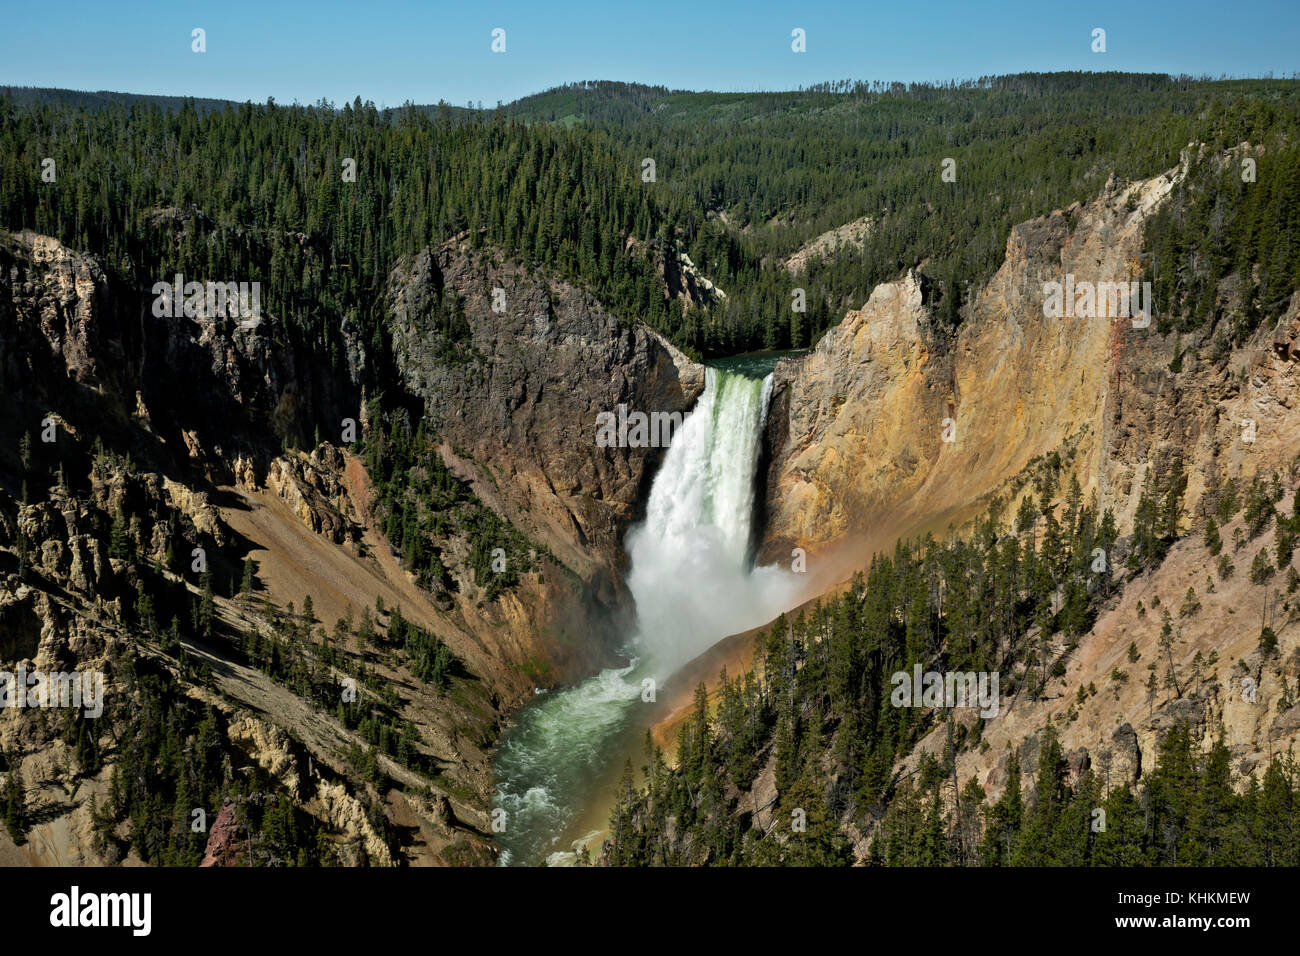 Wy02632-00...wyoming - lower falls de lookout point dans le grand canyon du Yellowstone Parc national de Yellowstone. Banque D'Images